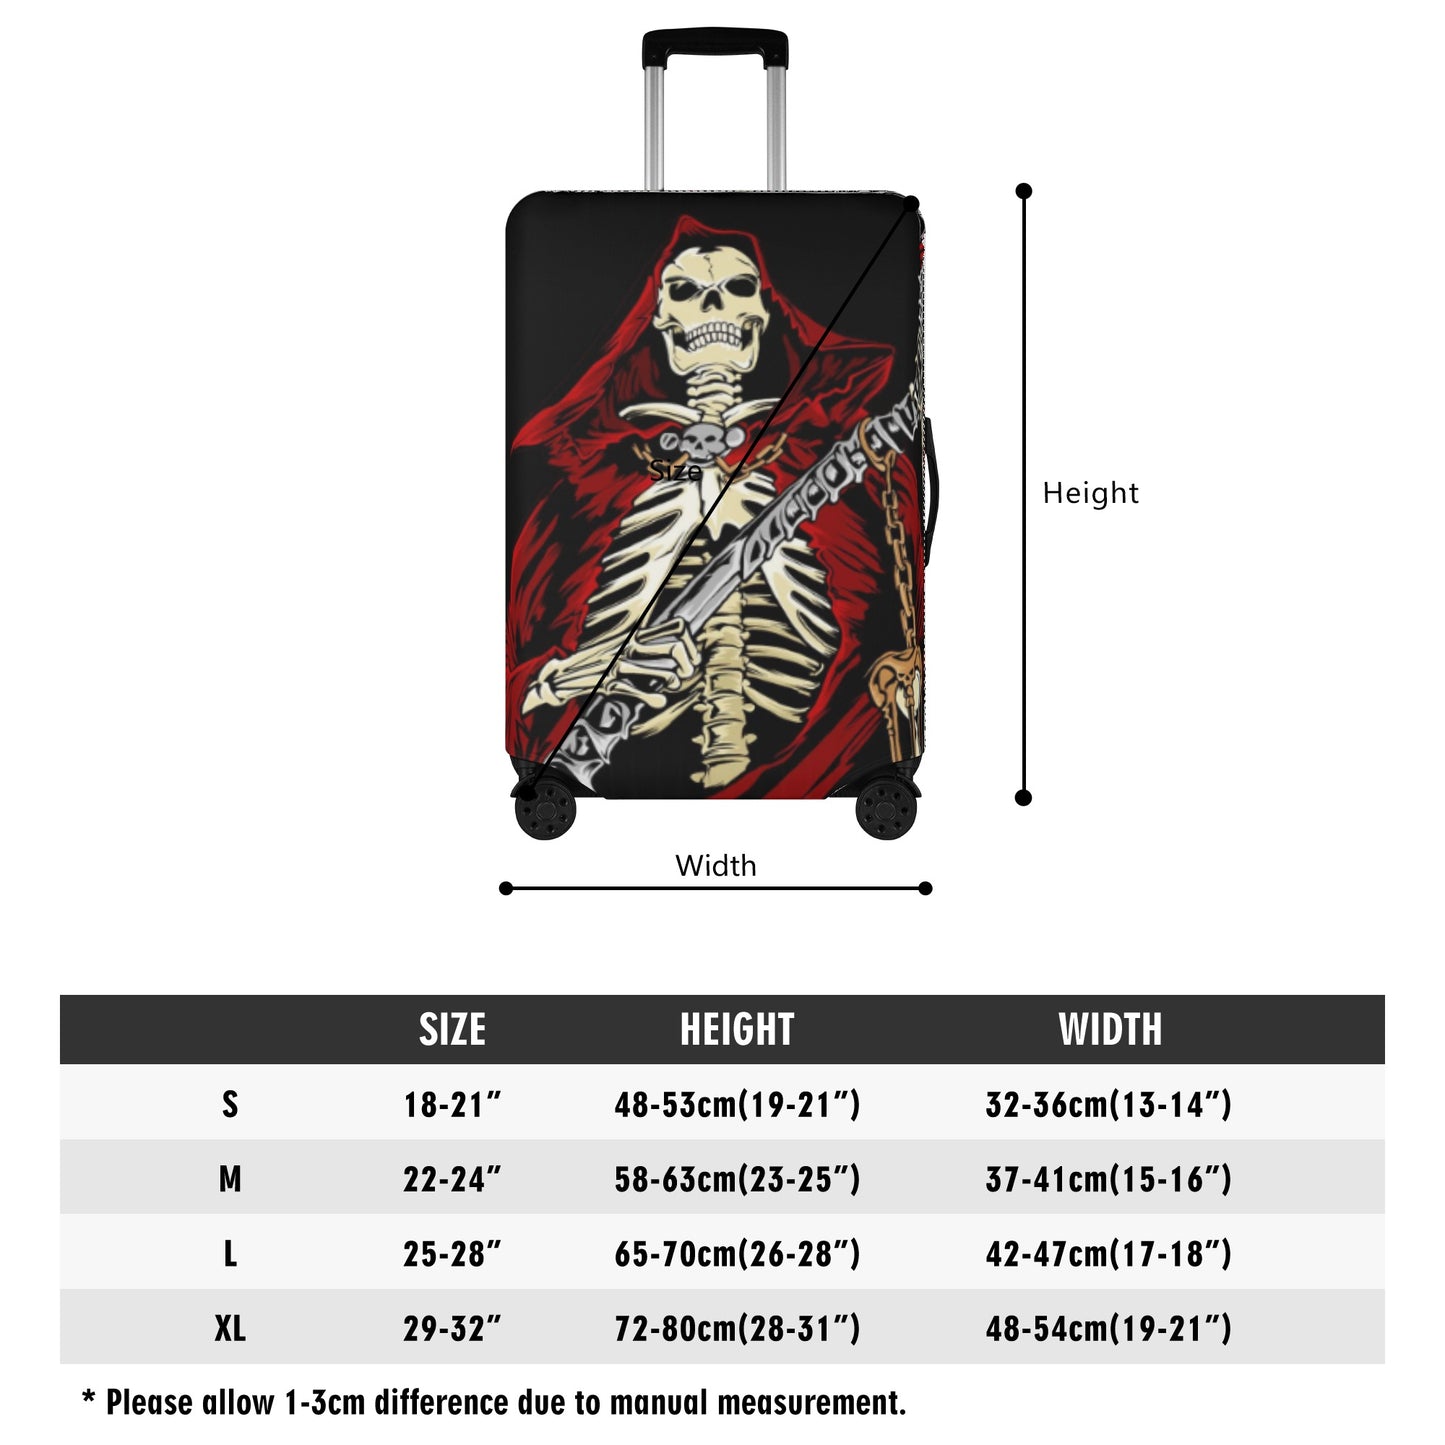 Grim reaper Haloween lugage suitcase cover set, skeleton luggage cover